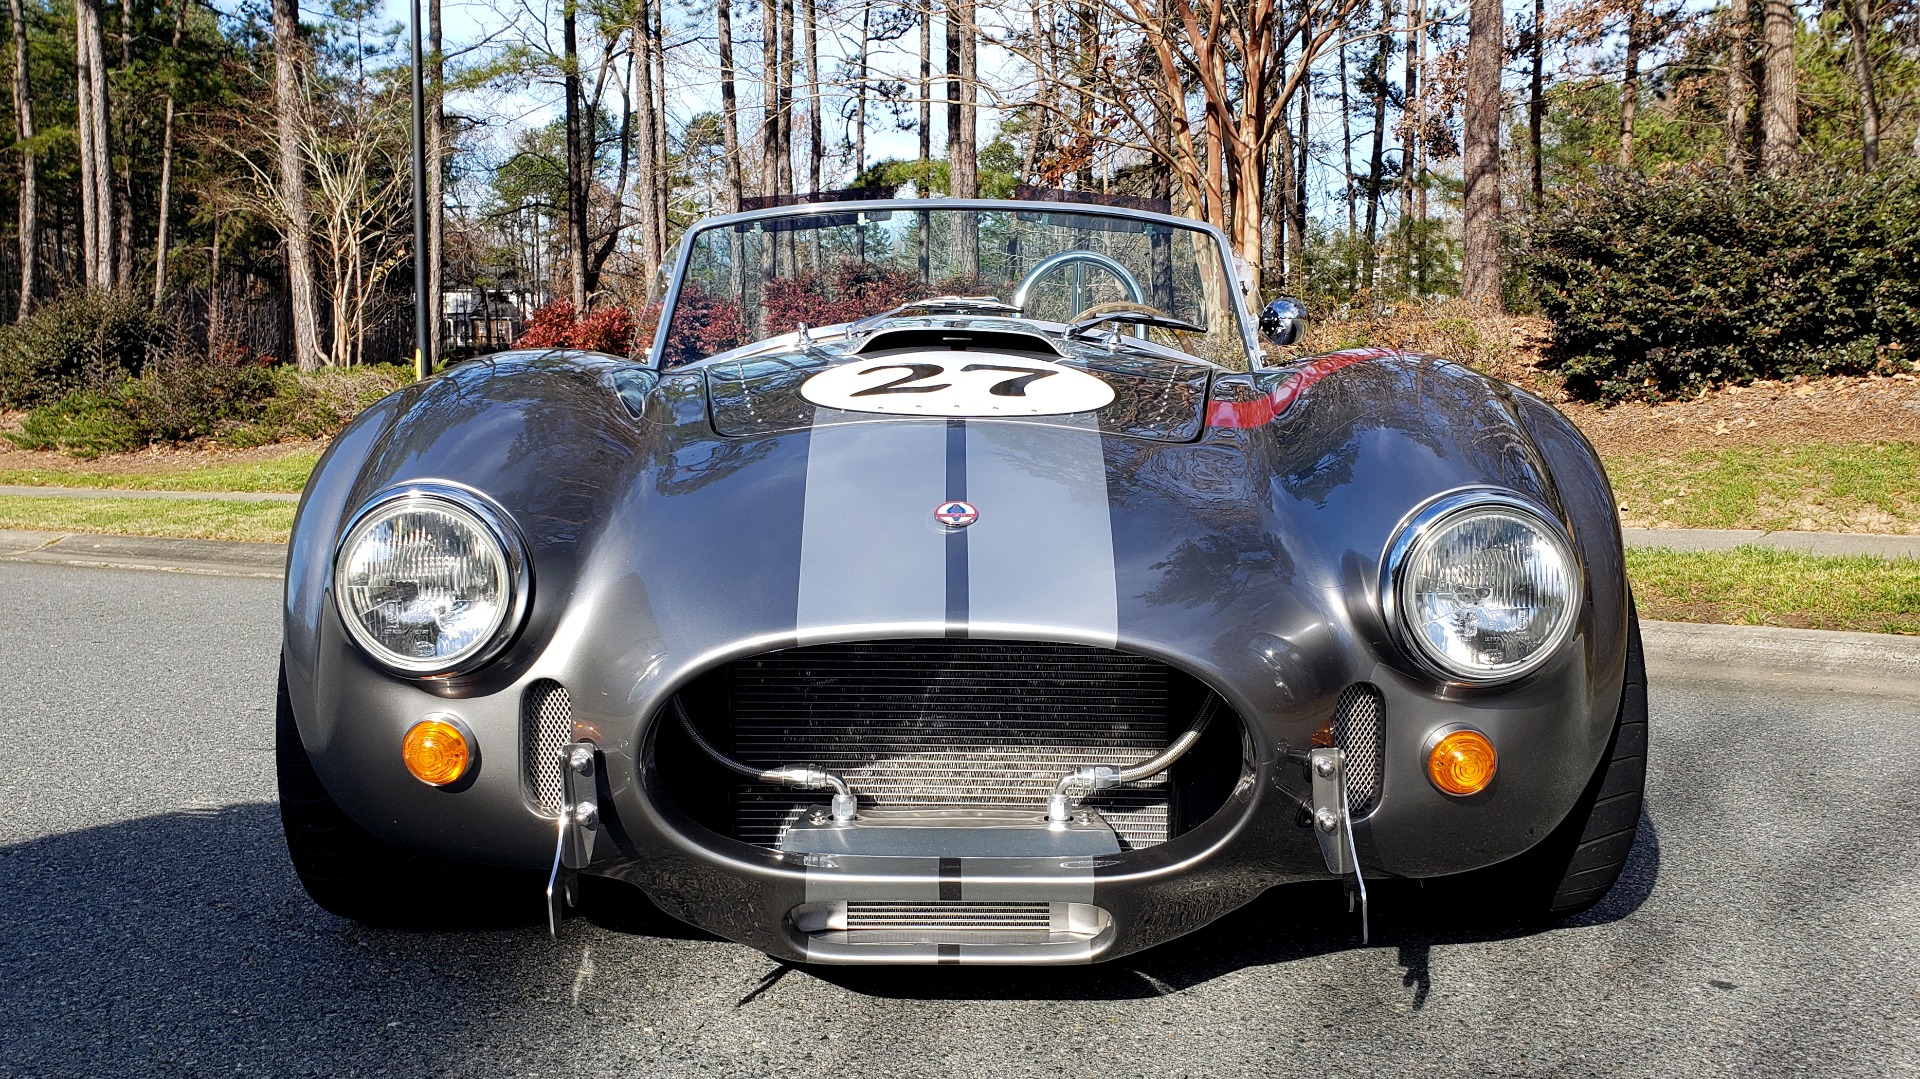 Used 1965 Ford COBRA 427 ROADSTER BY BACKDRAFT RACING ROUSH 553HP V8 / TREMEC 6-SPD / PWR STRNG for sale Sold at Formula Imports in Charlotte NC 28227 48